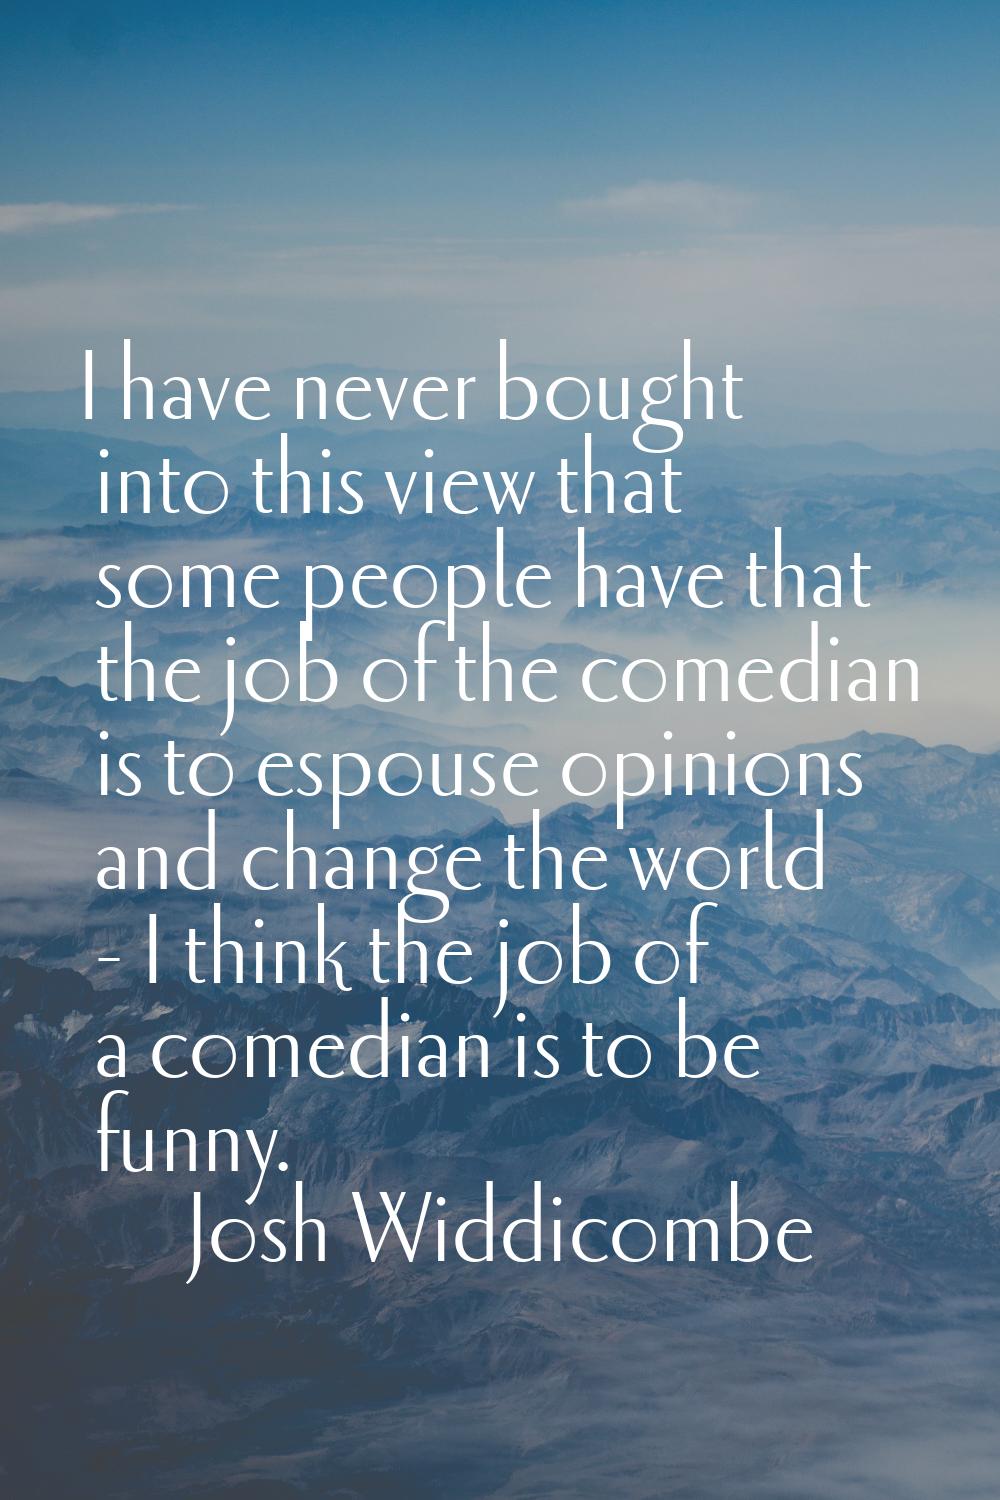 I have never bought into this view that some people have that the job of the comedian is to espouse